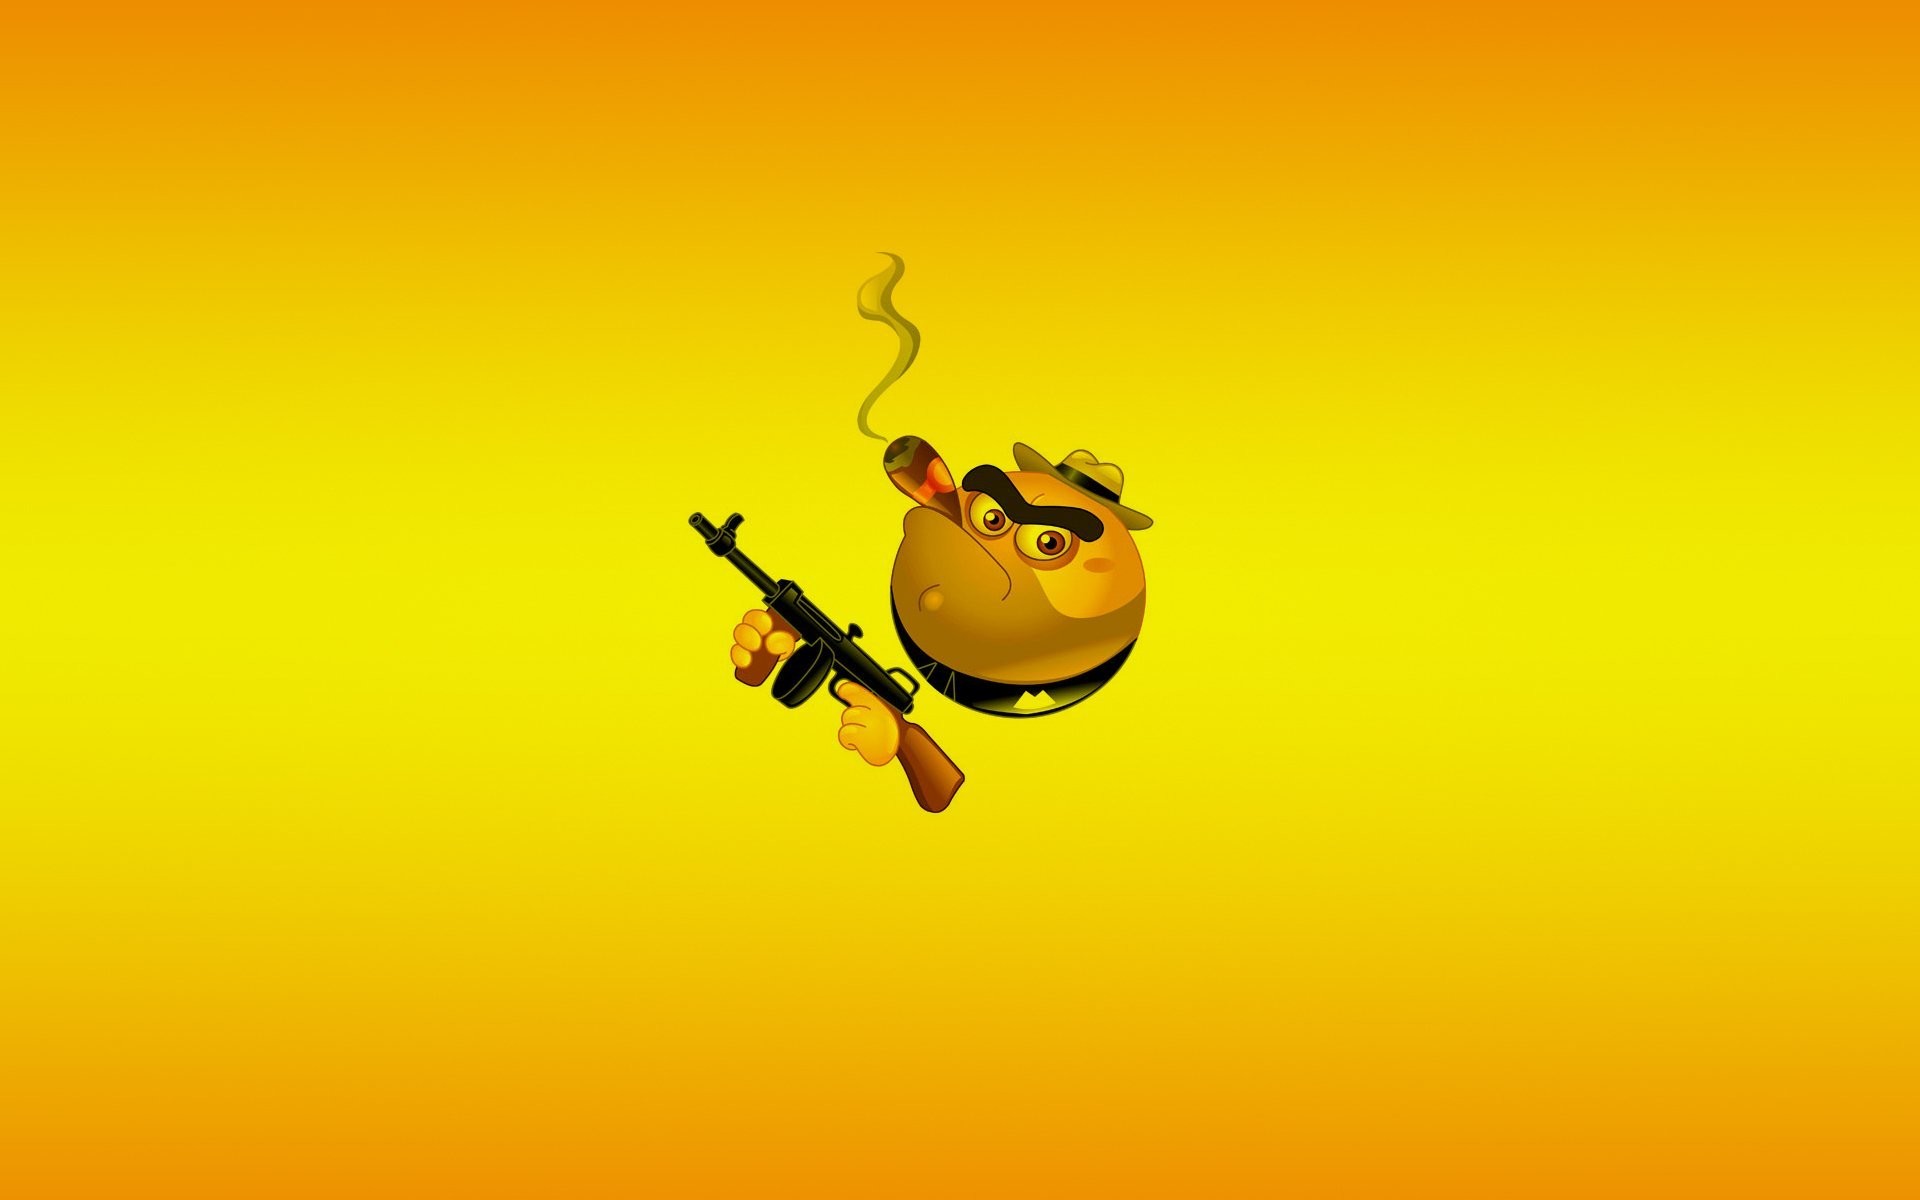 1920x1200 smile smile weapon yellow machine a gangster cigar minimalism